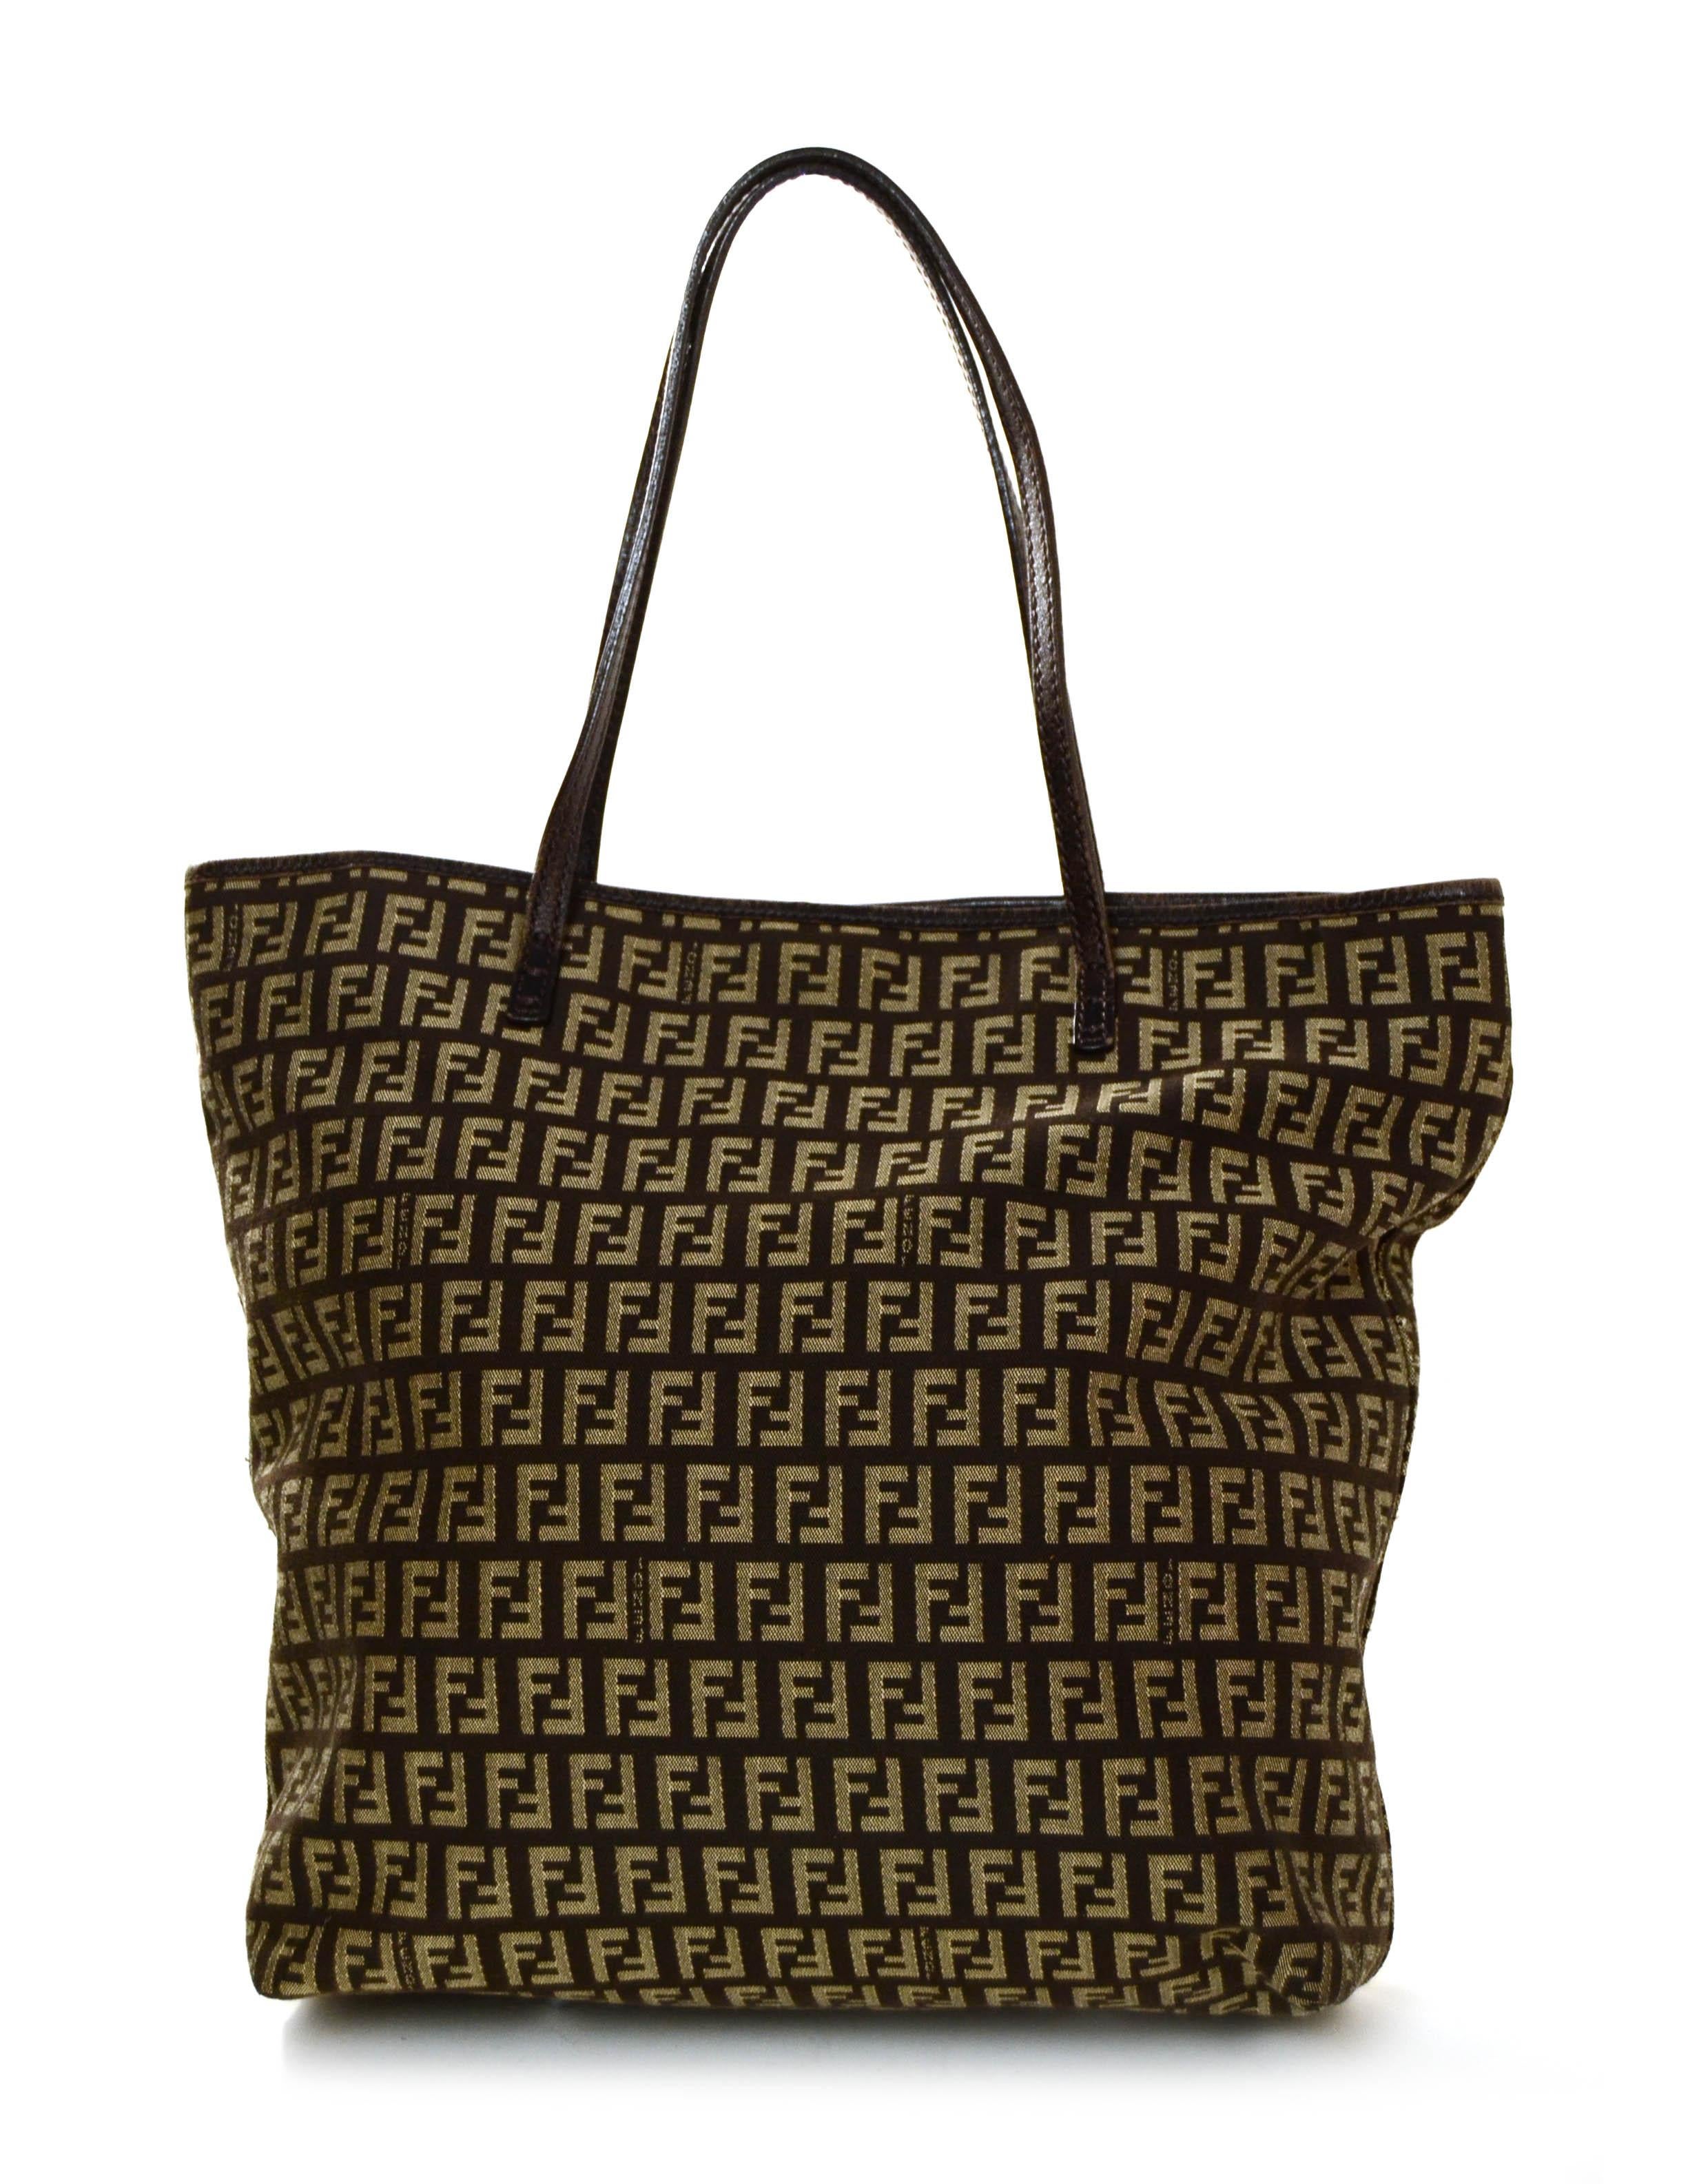 Fendi Mini Monogram Brown/Beige Tote Bag

Made In: Italy
Year of Production: Vintage
Color: Brown monogram
Hardware: Silvertone
Materials: Canvas
Lining: Nylon
Closure/Opening: Magnetic snap
Interior Pockets: Two small side by side
Exterior